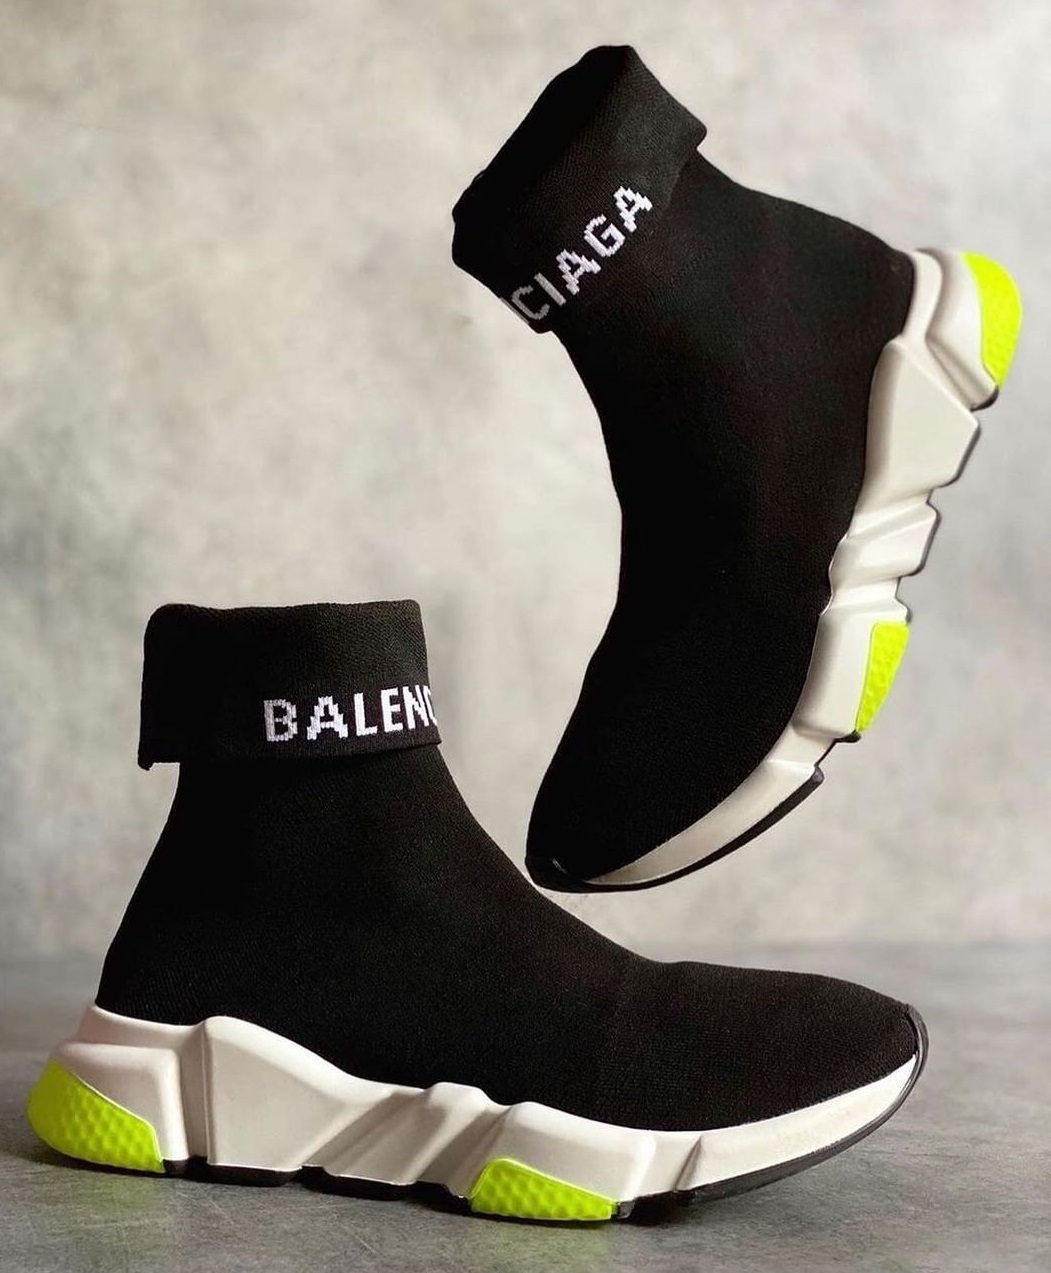 Balenciaga Speed Trainer being one of the products to own